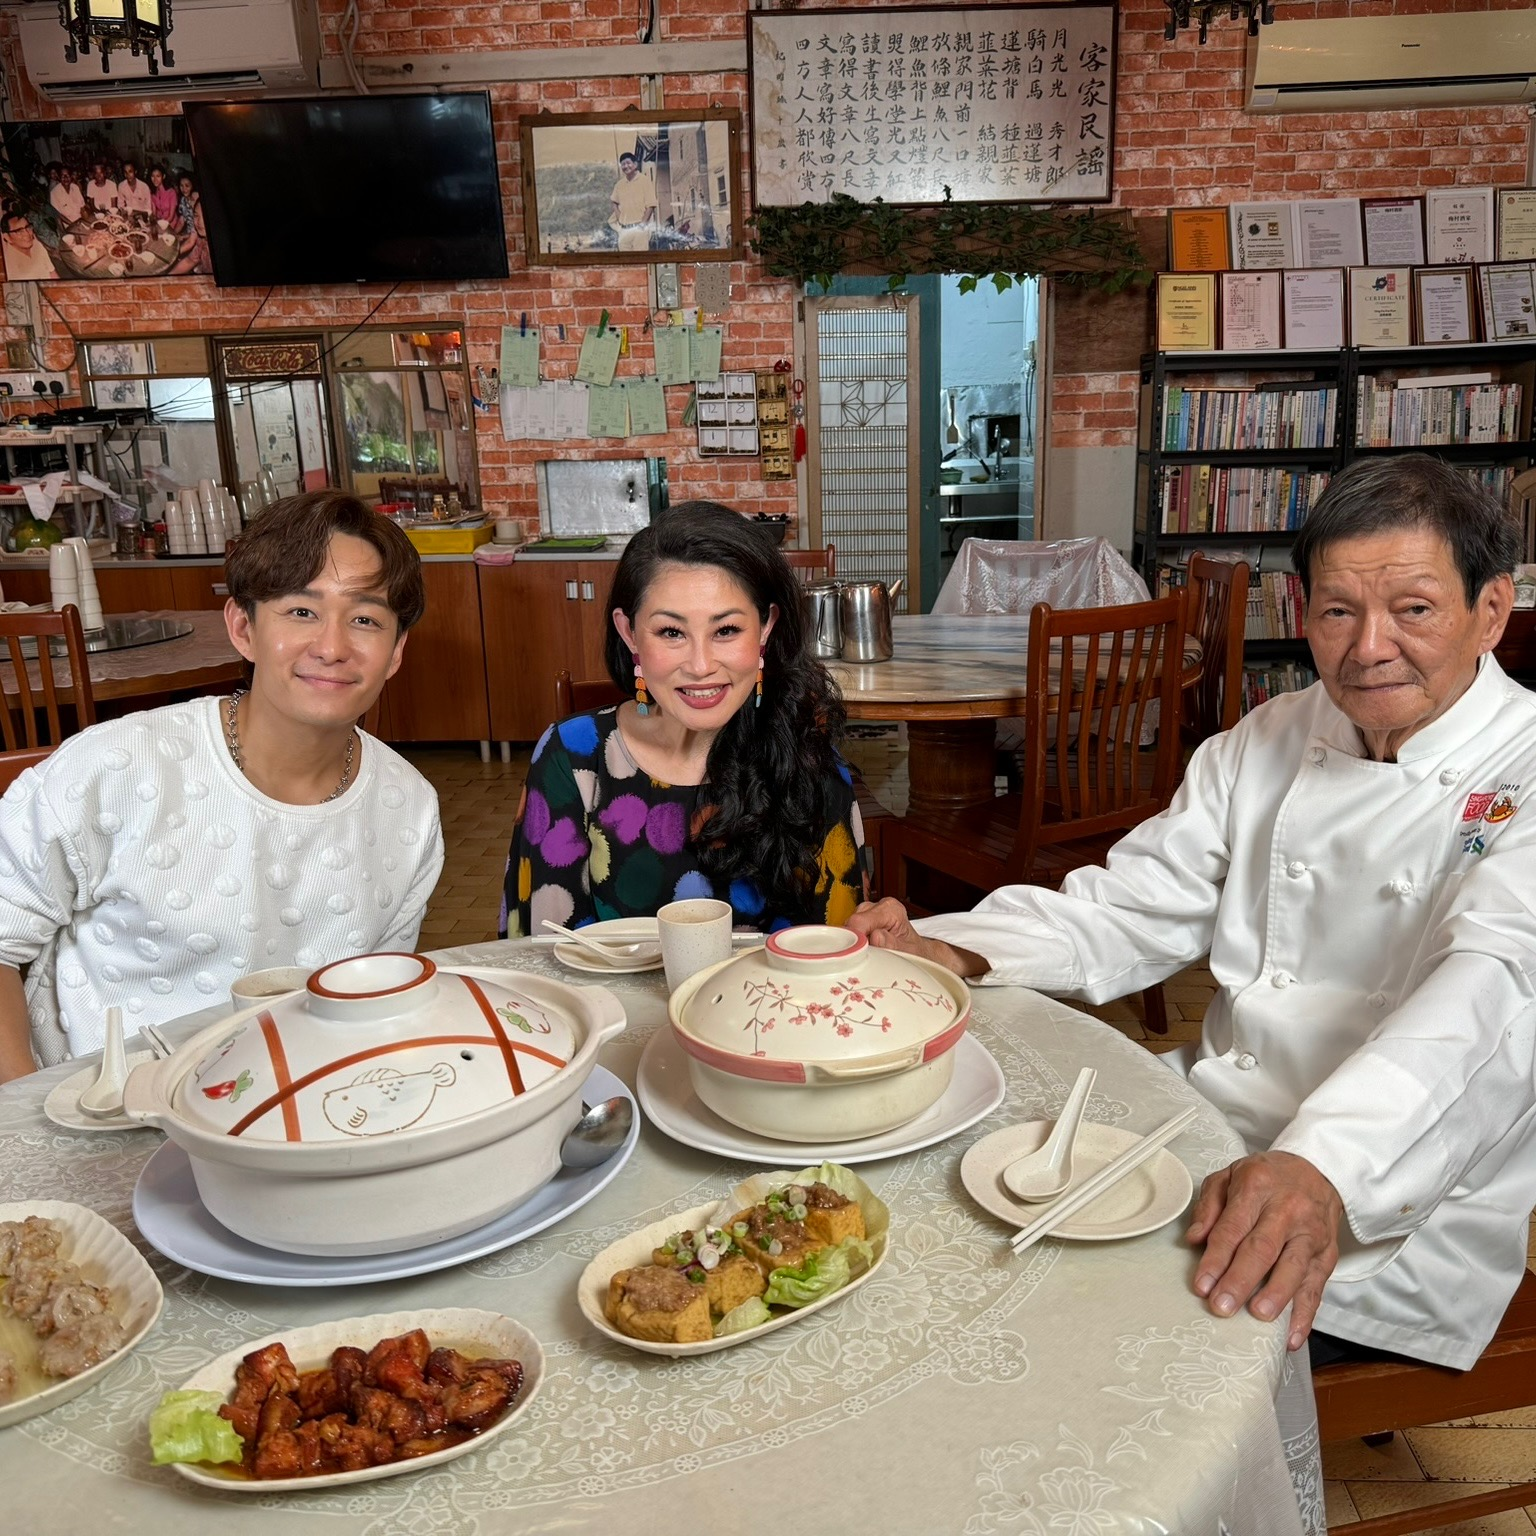 S'PORE HERITAGE: TRADITIONAL HAKKA RESTAURANT WITH ACTOR JEREMY CHAN